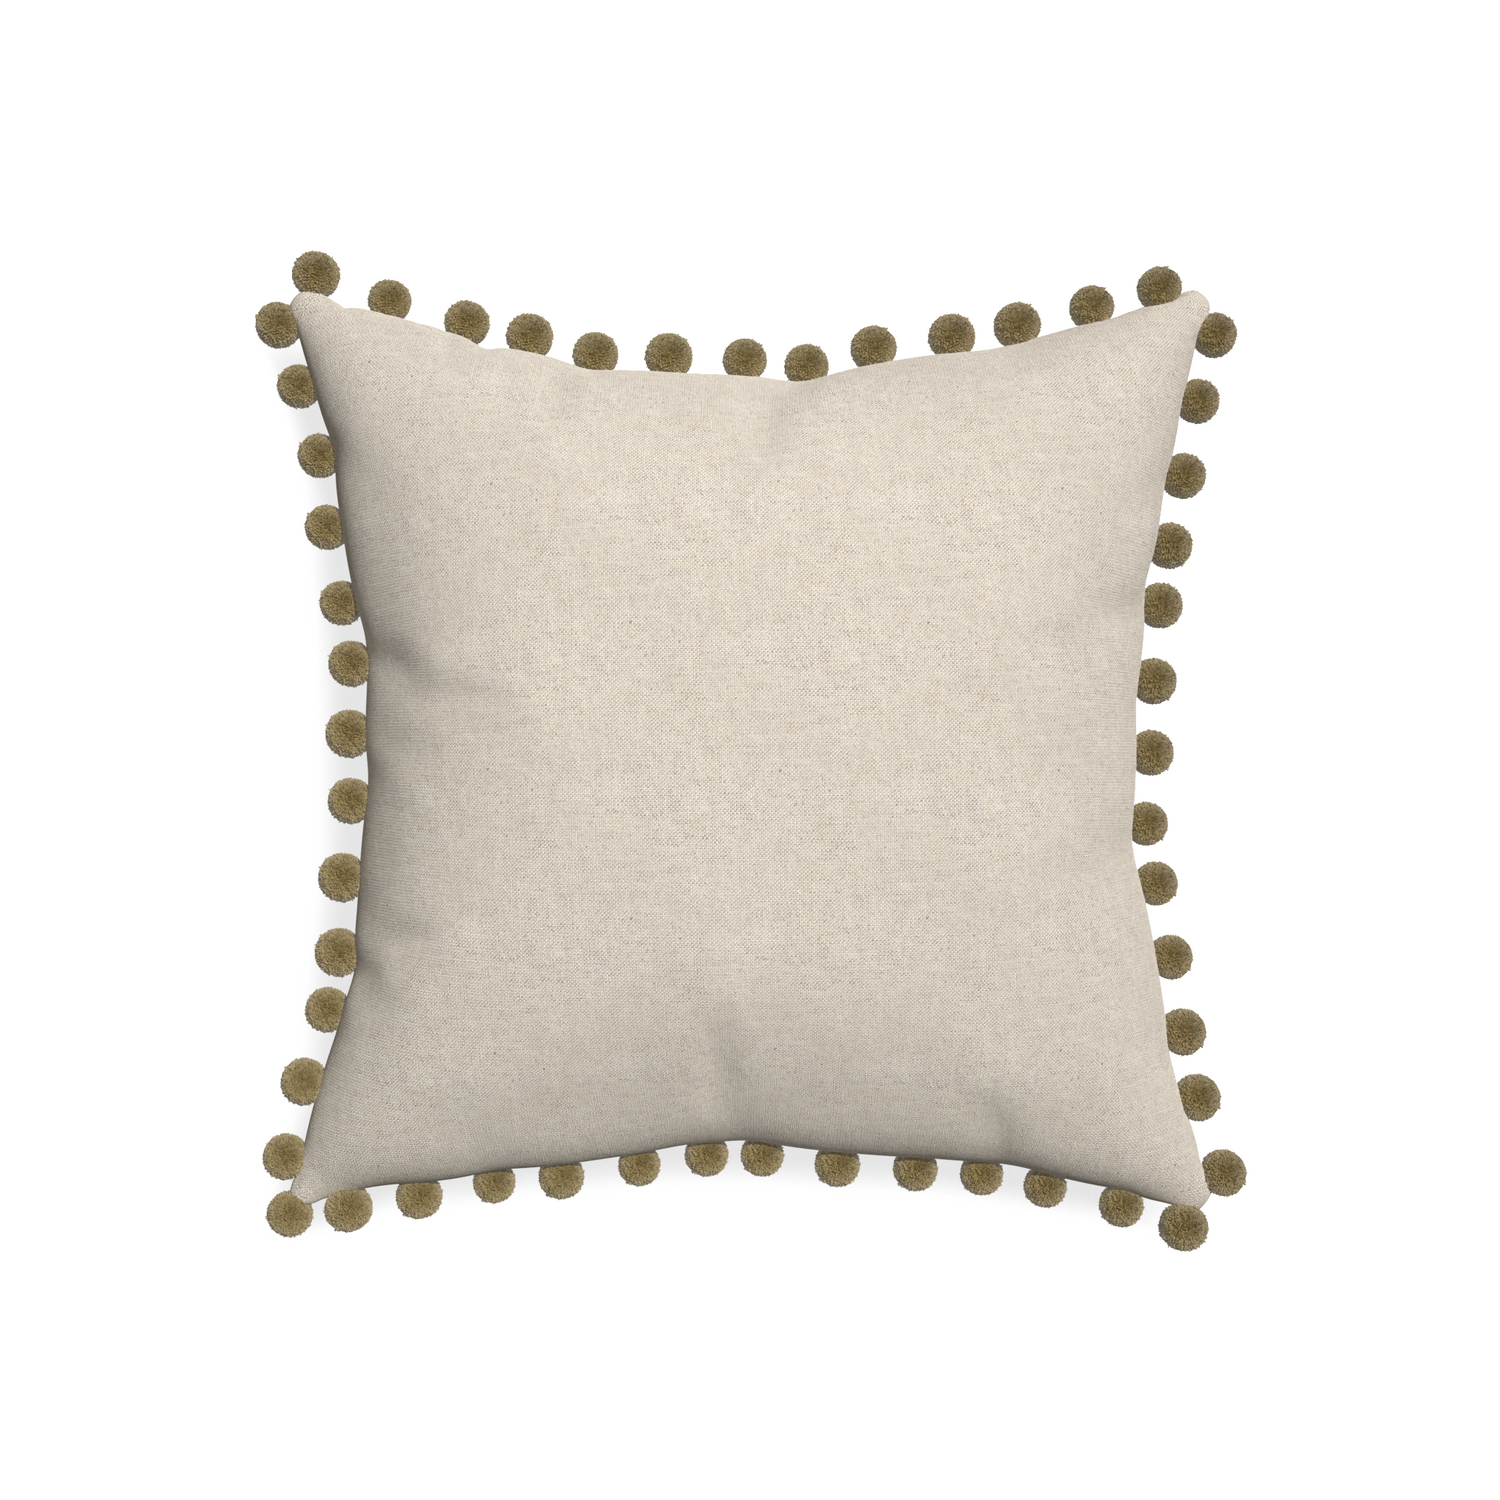 20-square oat custom light brownpillow with olive pom pom on white background